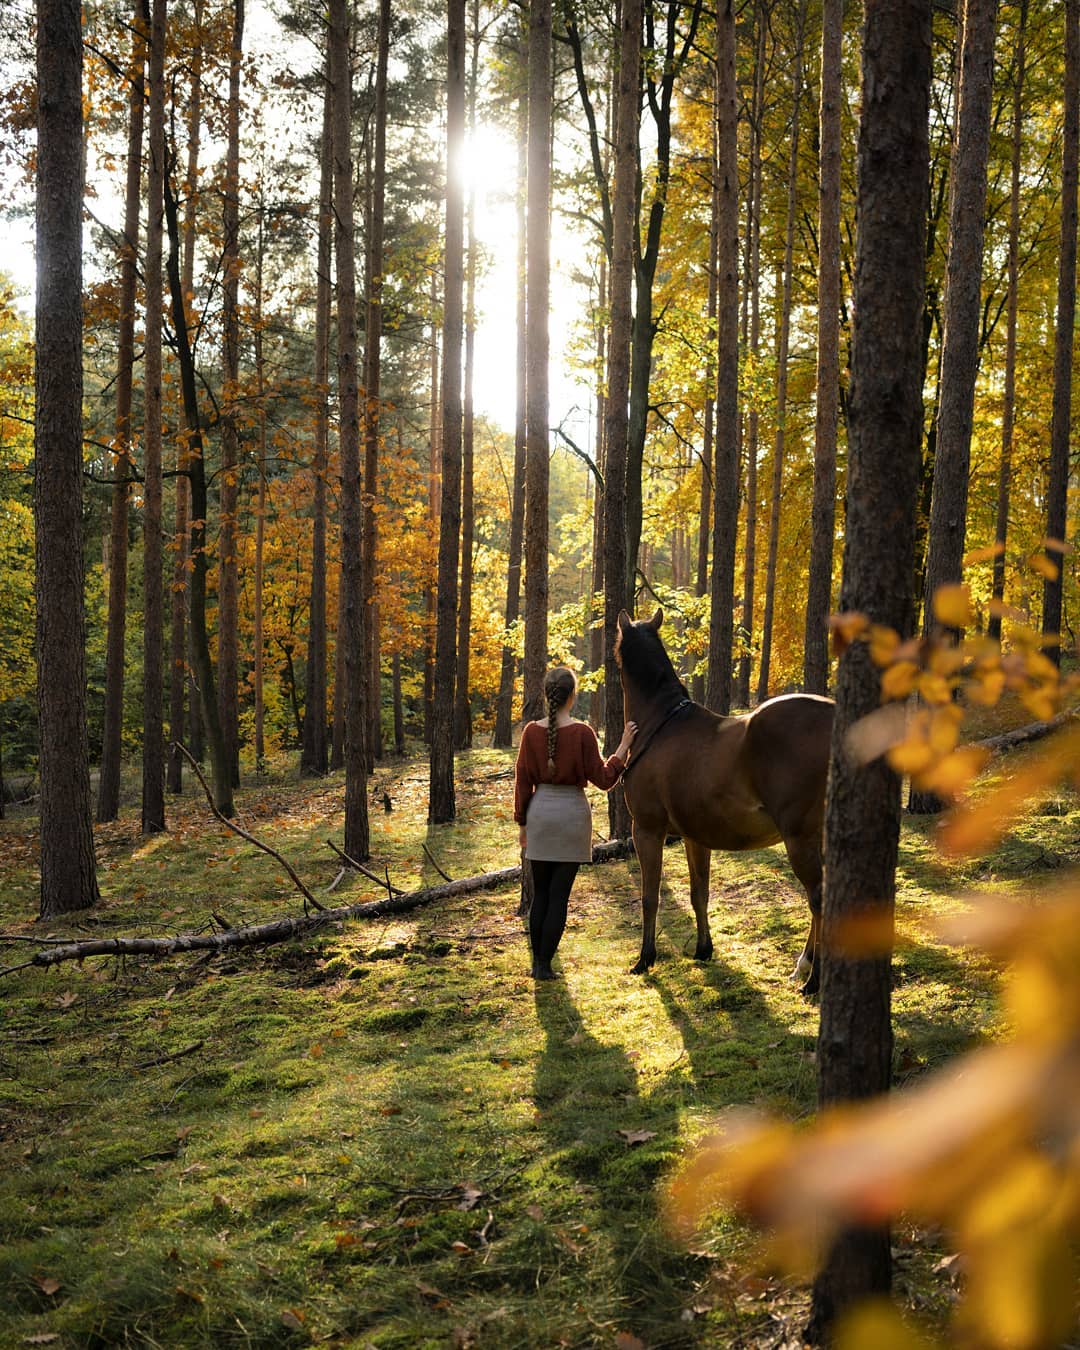 Autumn Magic with Bibs and Mono 🍂🌤️❤️

#autumnforest #horse #photography #horsephotography #colors #orange #berlin #sunflare #autumnmood #a7rii #vsco #picoftheday